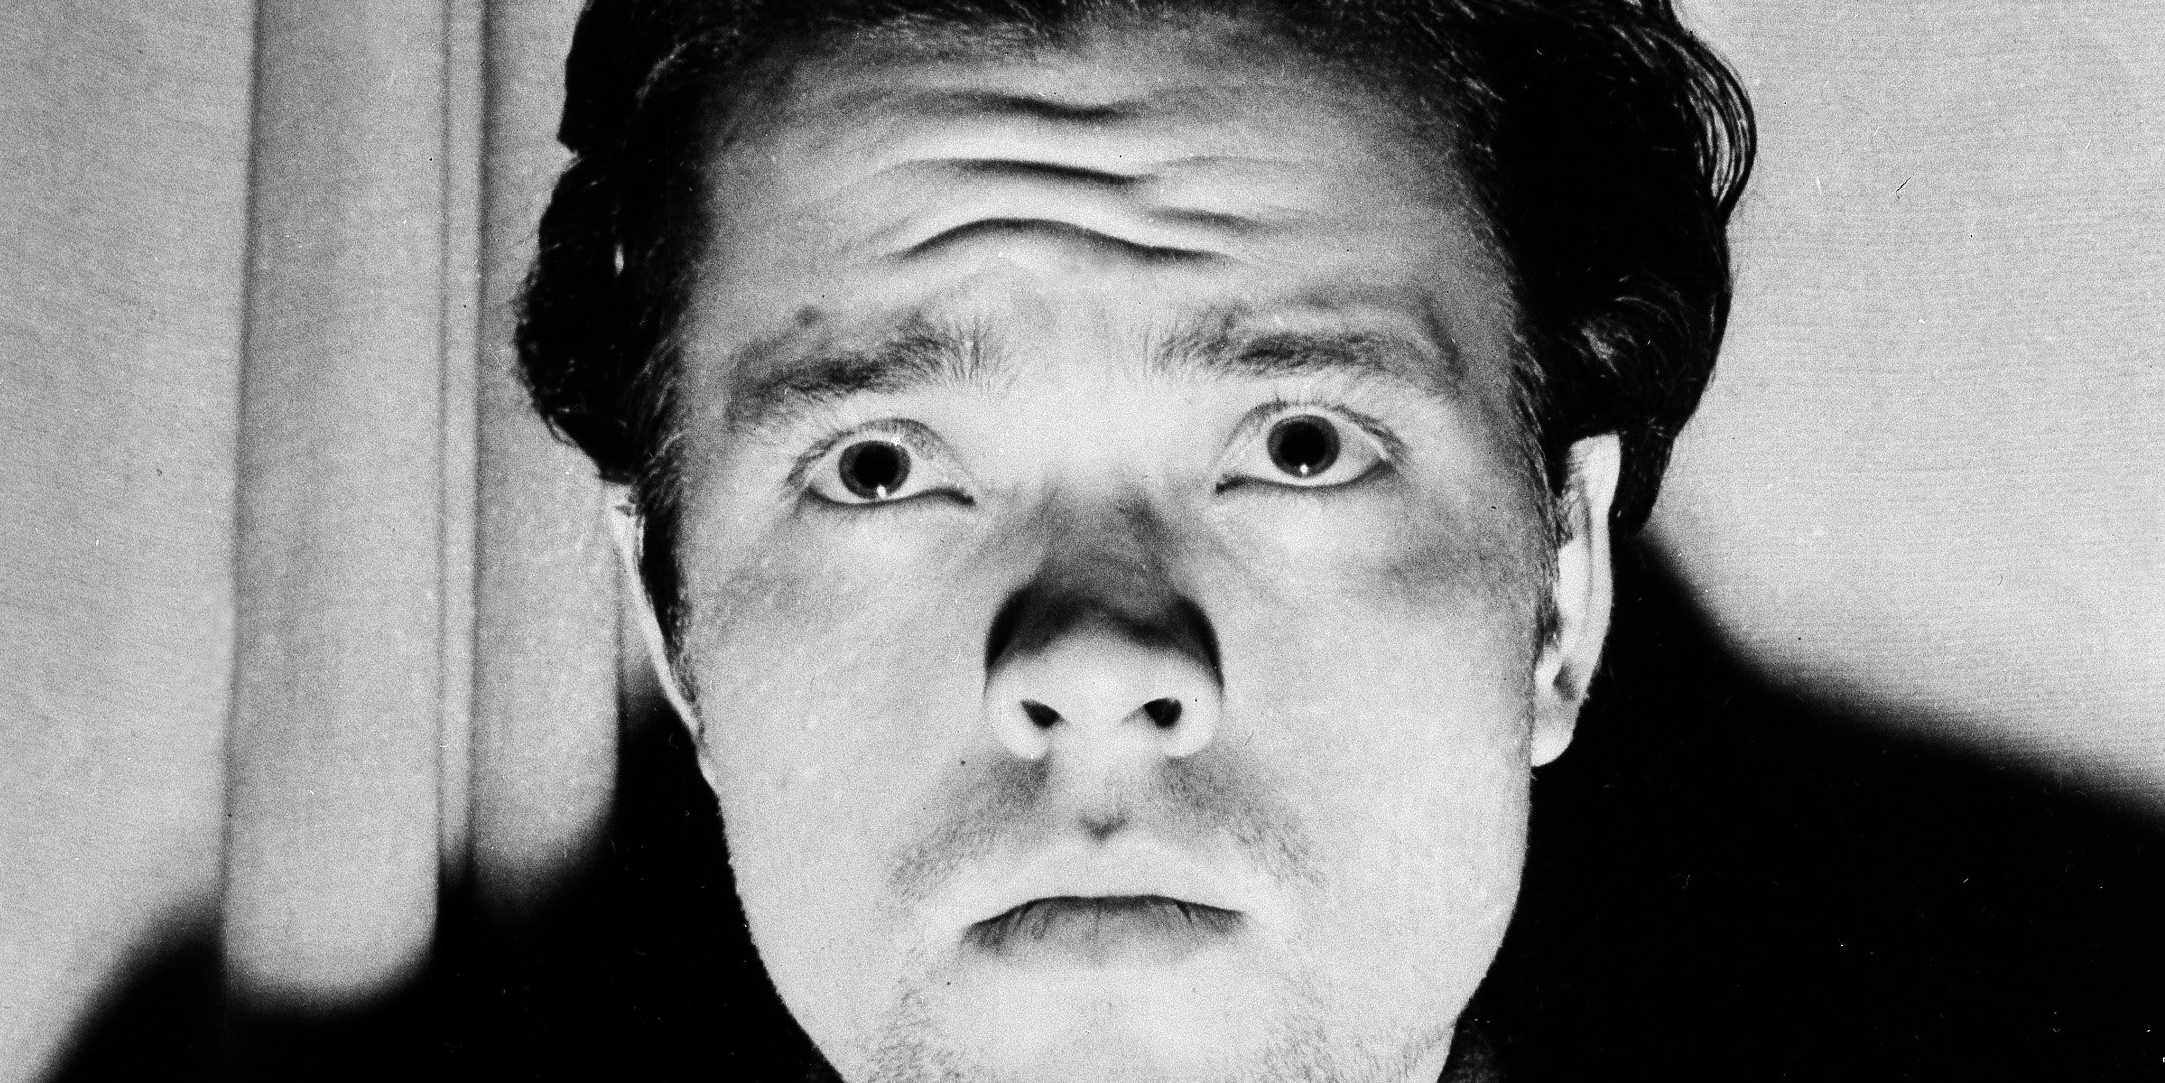 Geek insider, geekinsider, geekinsider. Com,, help finish orson welles' final film with indiegogo, entertainment